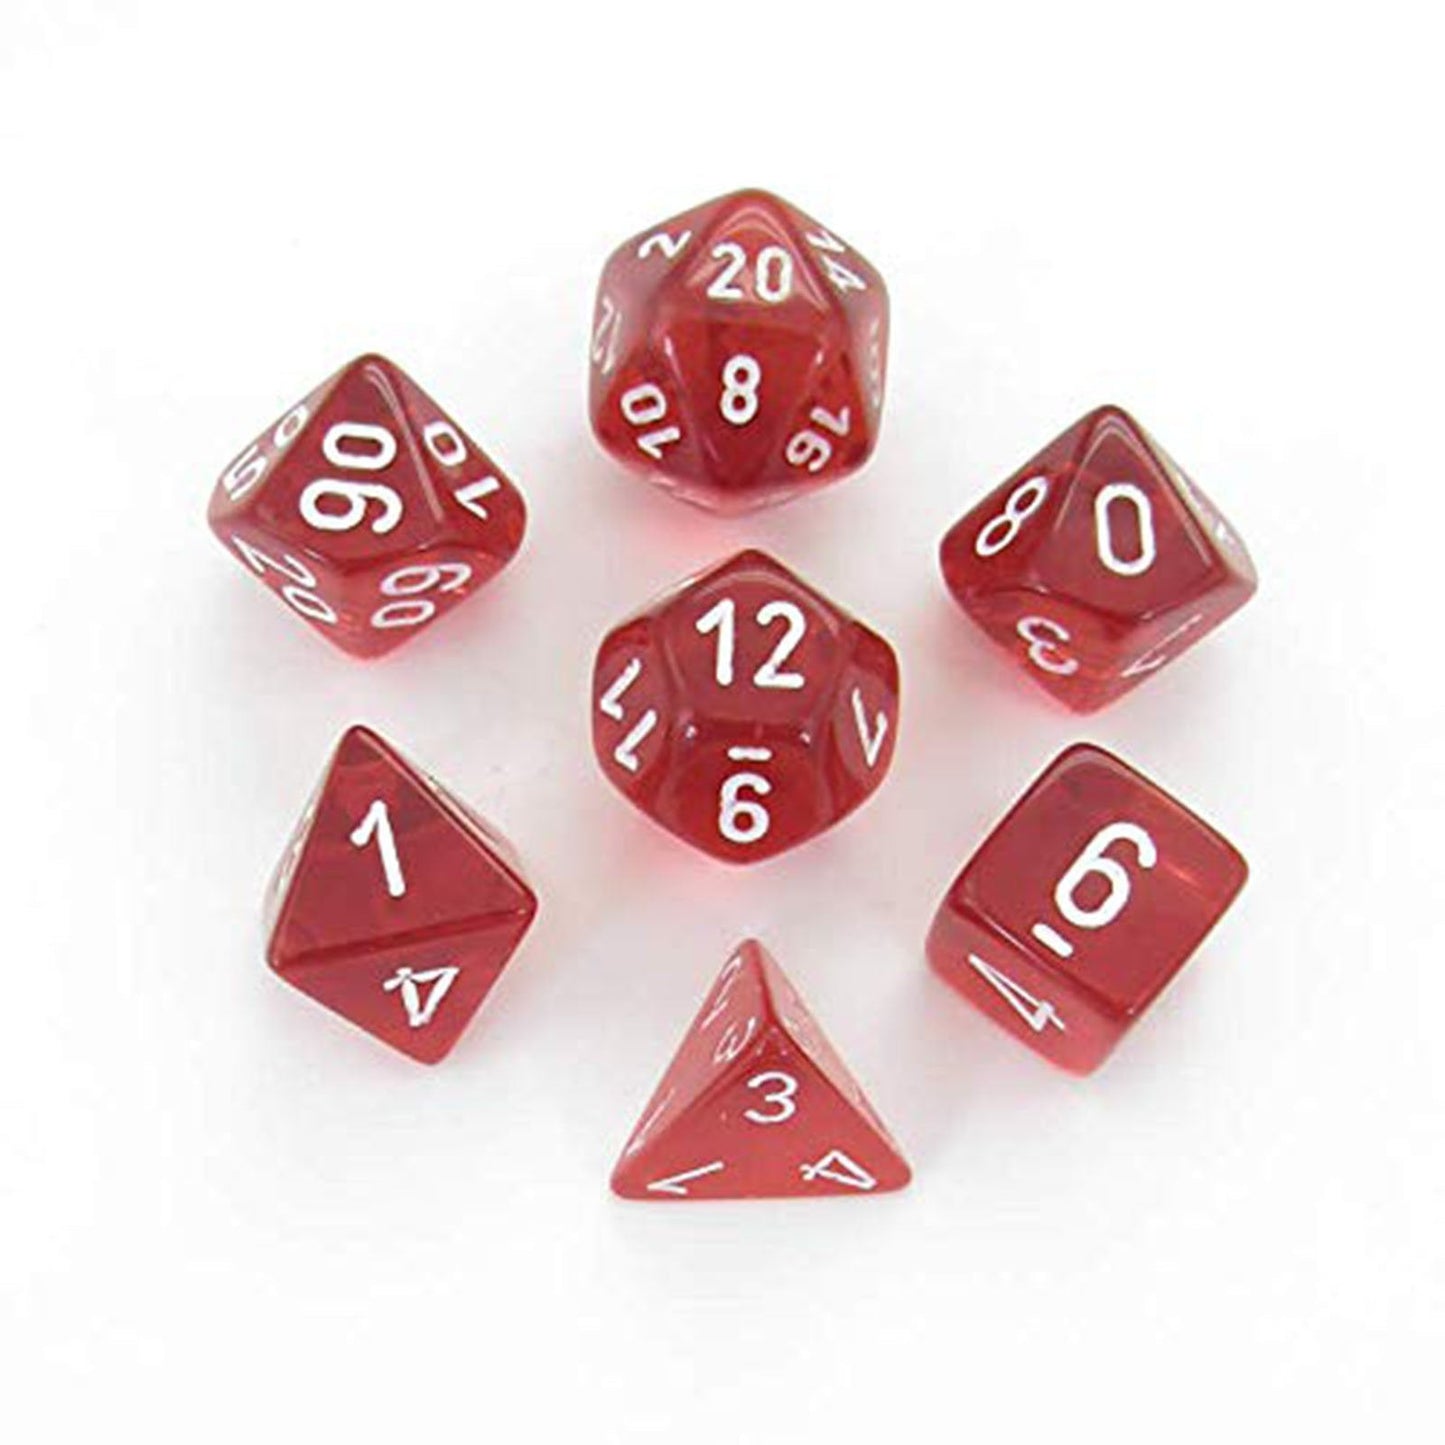 Chessex Dice: 7 Die Set - Translucent - Red with White (CHX 23074) - Gamescape